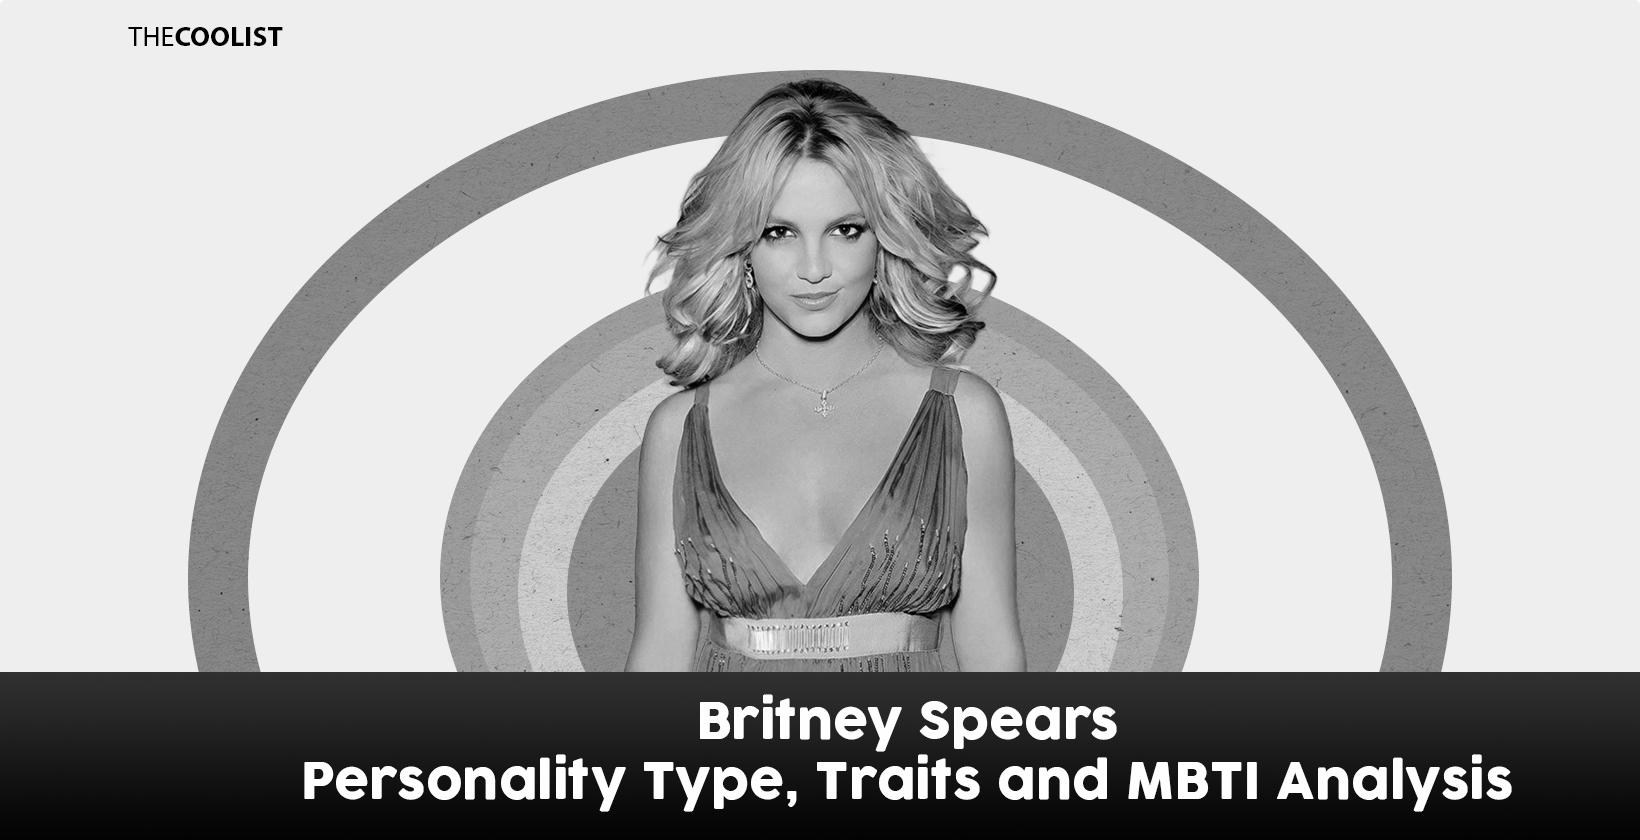 Britney Spears' MBTI and Enneagram Types